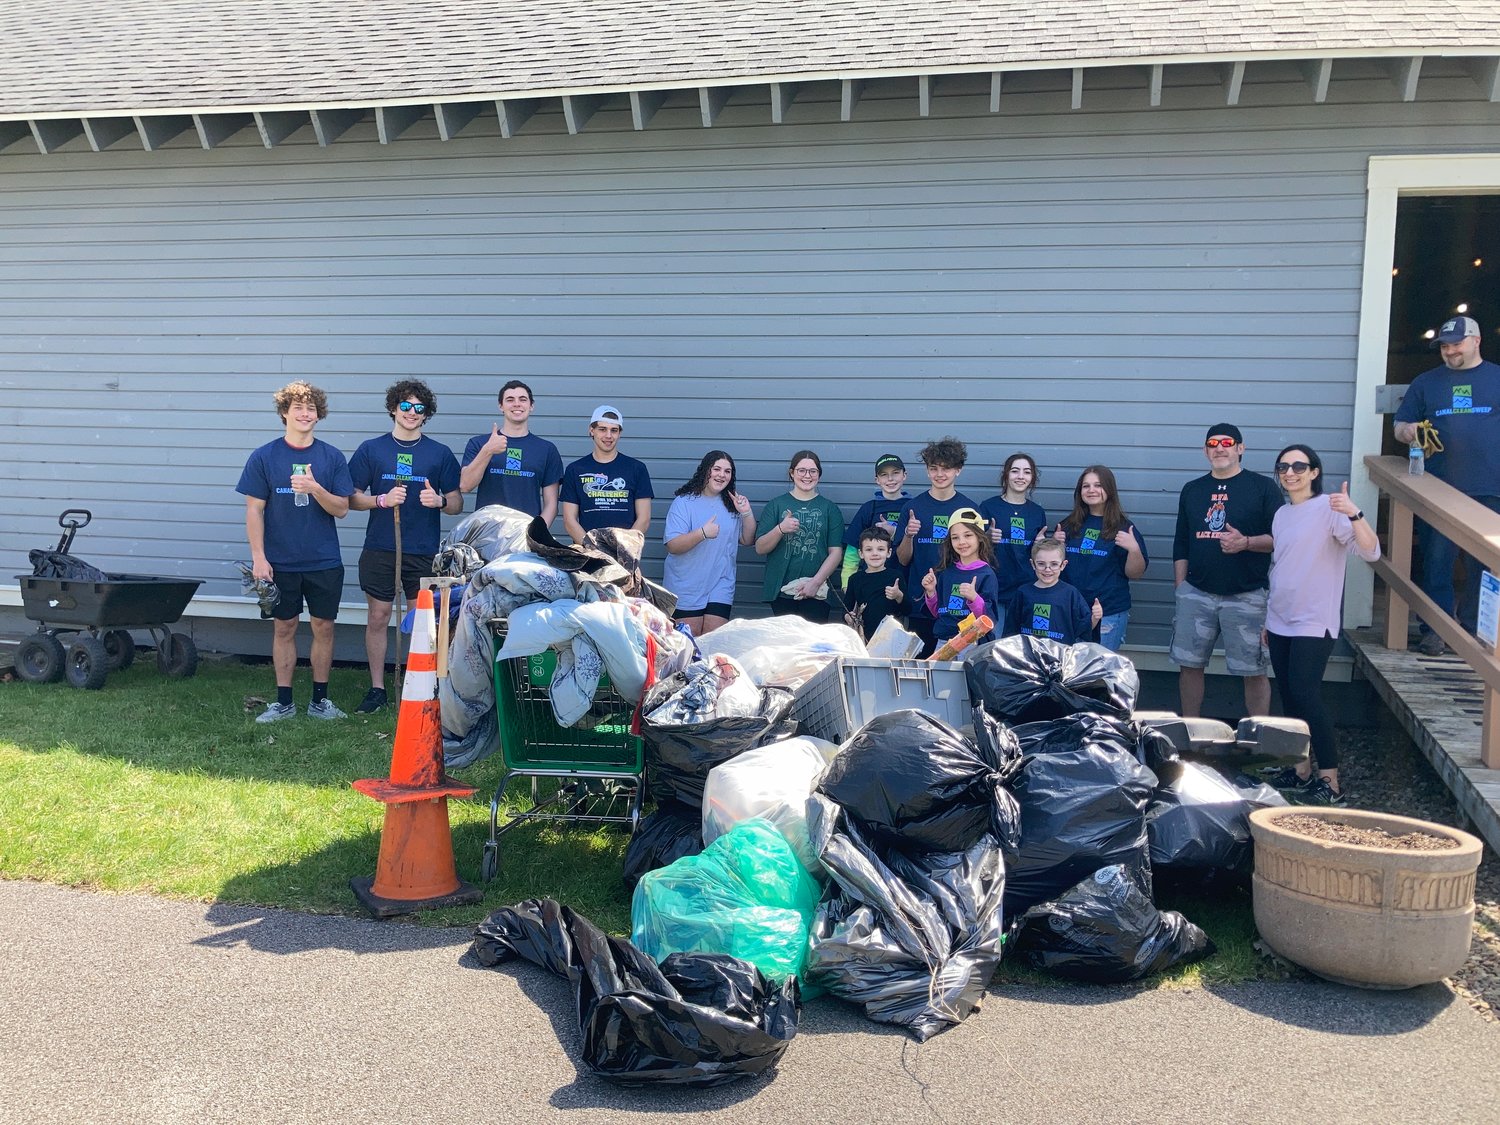 JOB WELL DONE — Volunteers with the Rome Canal Cleanup give a thumbs up for a job well done after they show off all the litter they cleared from Bellamy Park, the Erie Canal Trail and Mohawk River Trail during a special cleanup event Sunday.(Photo submitted)